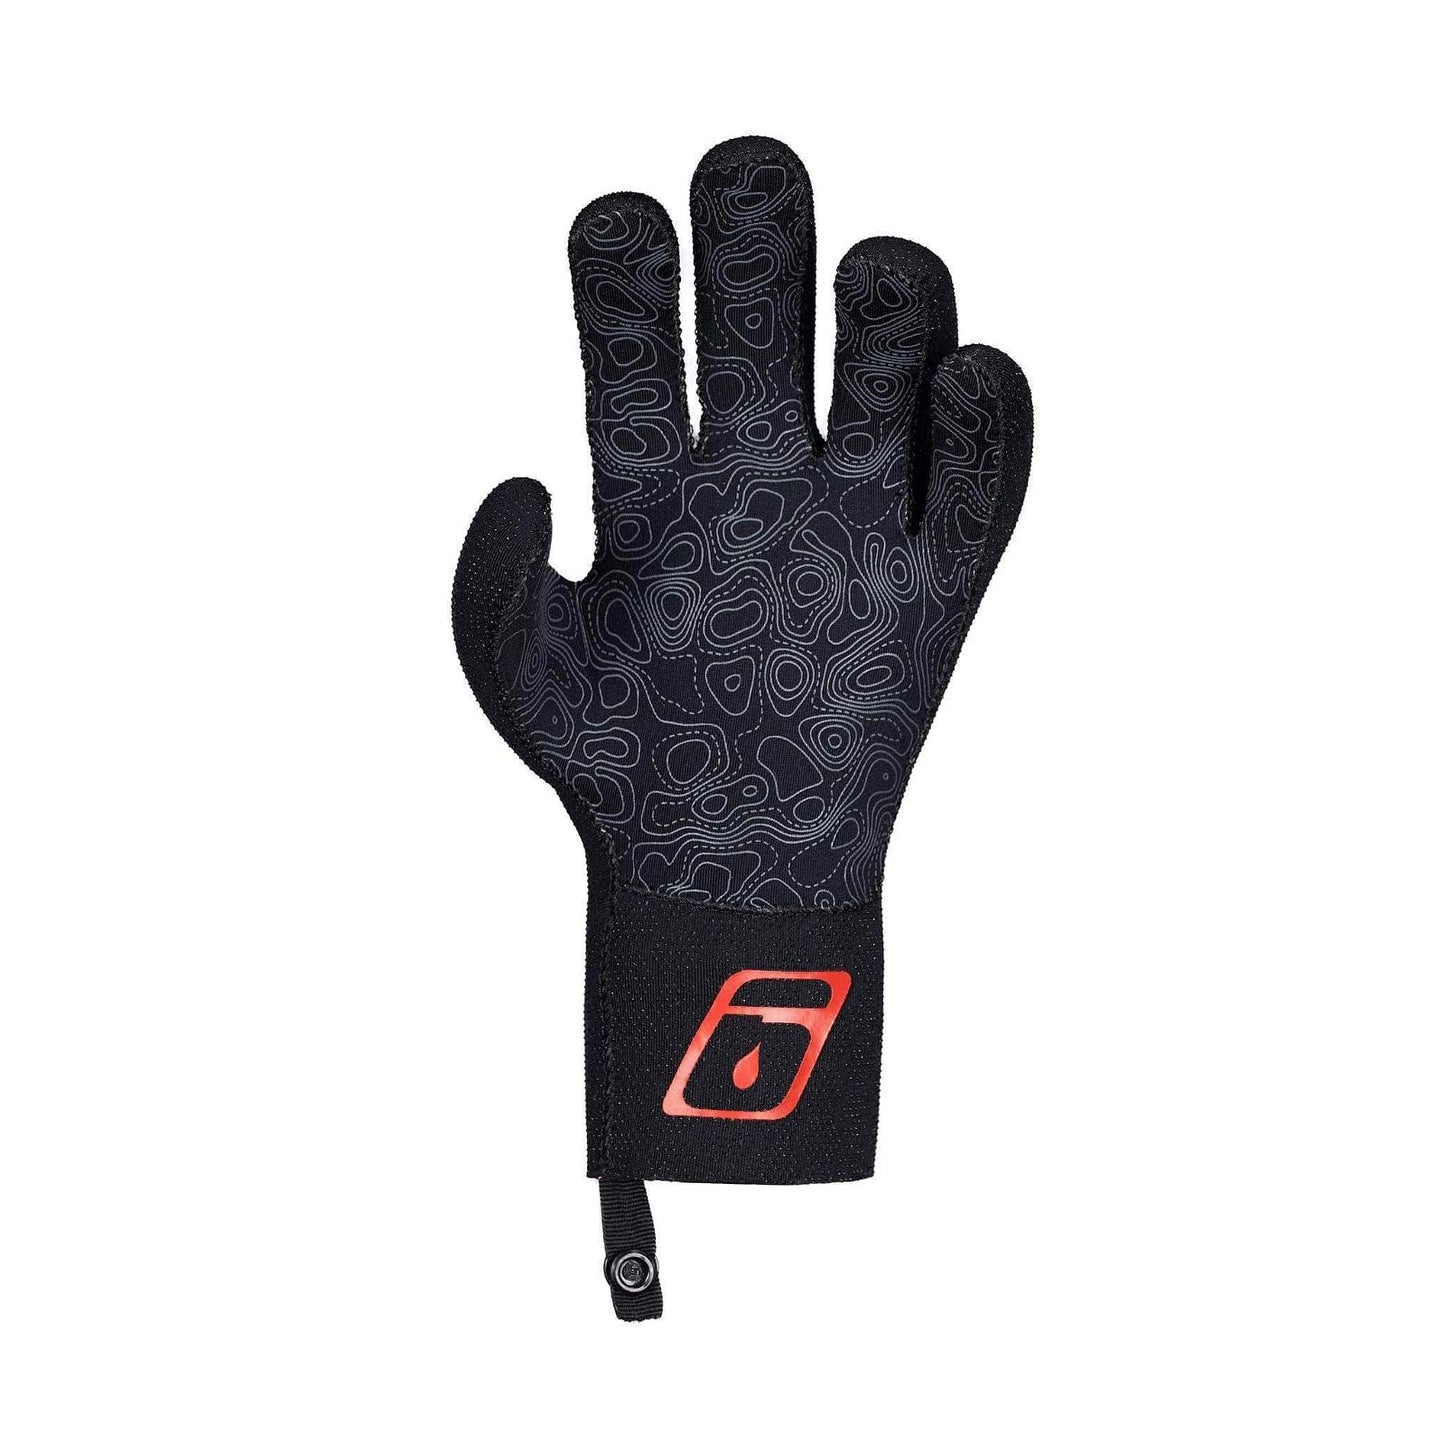   Proton Glove  BestCoast Outfitters 